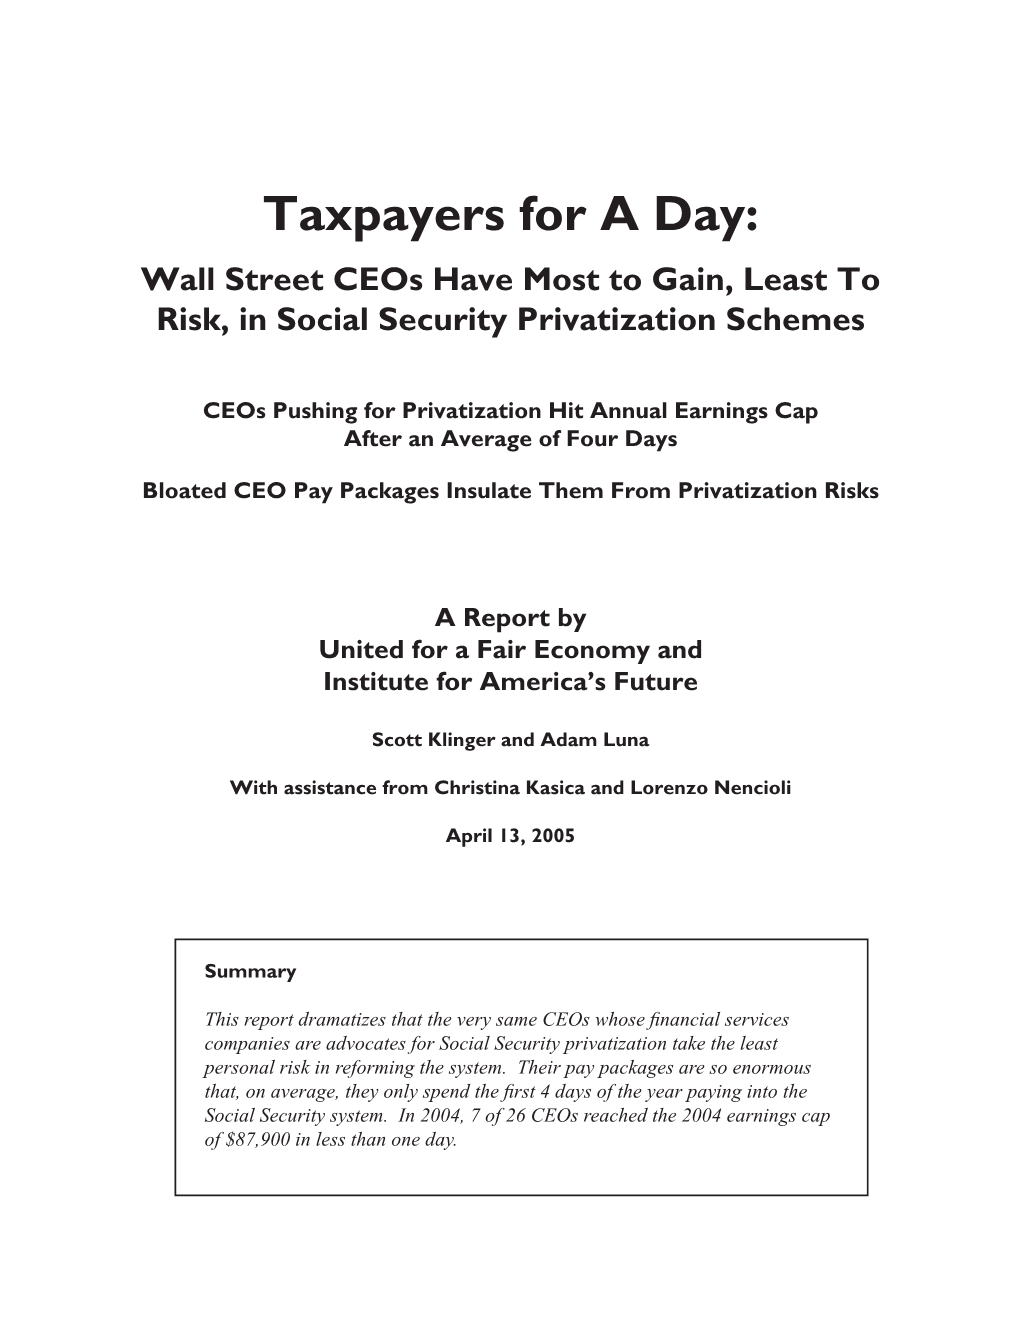 Tax Day Report 2005.Ss.Indd